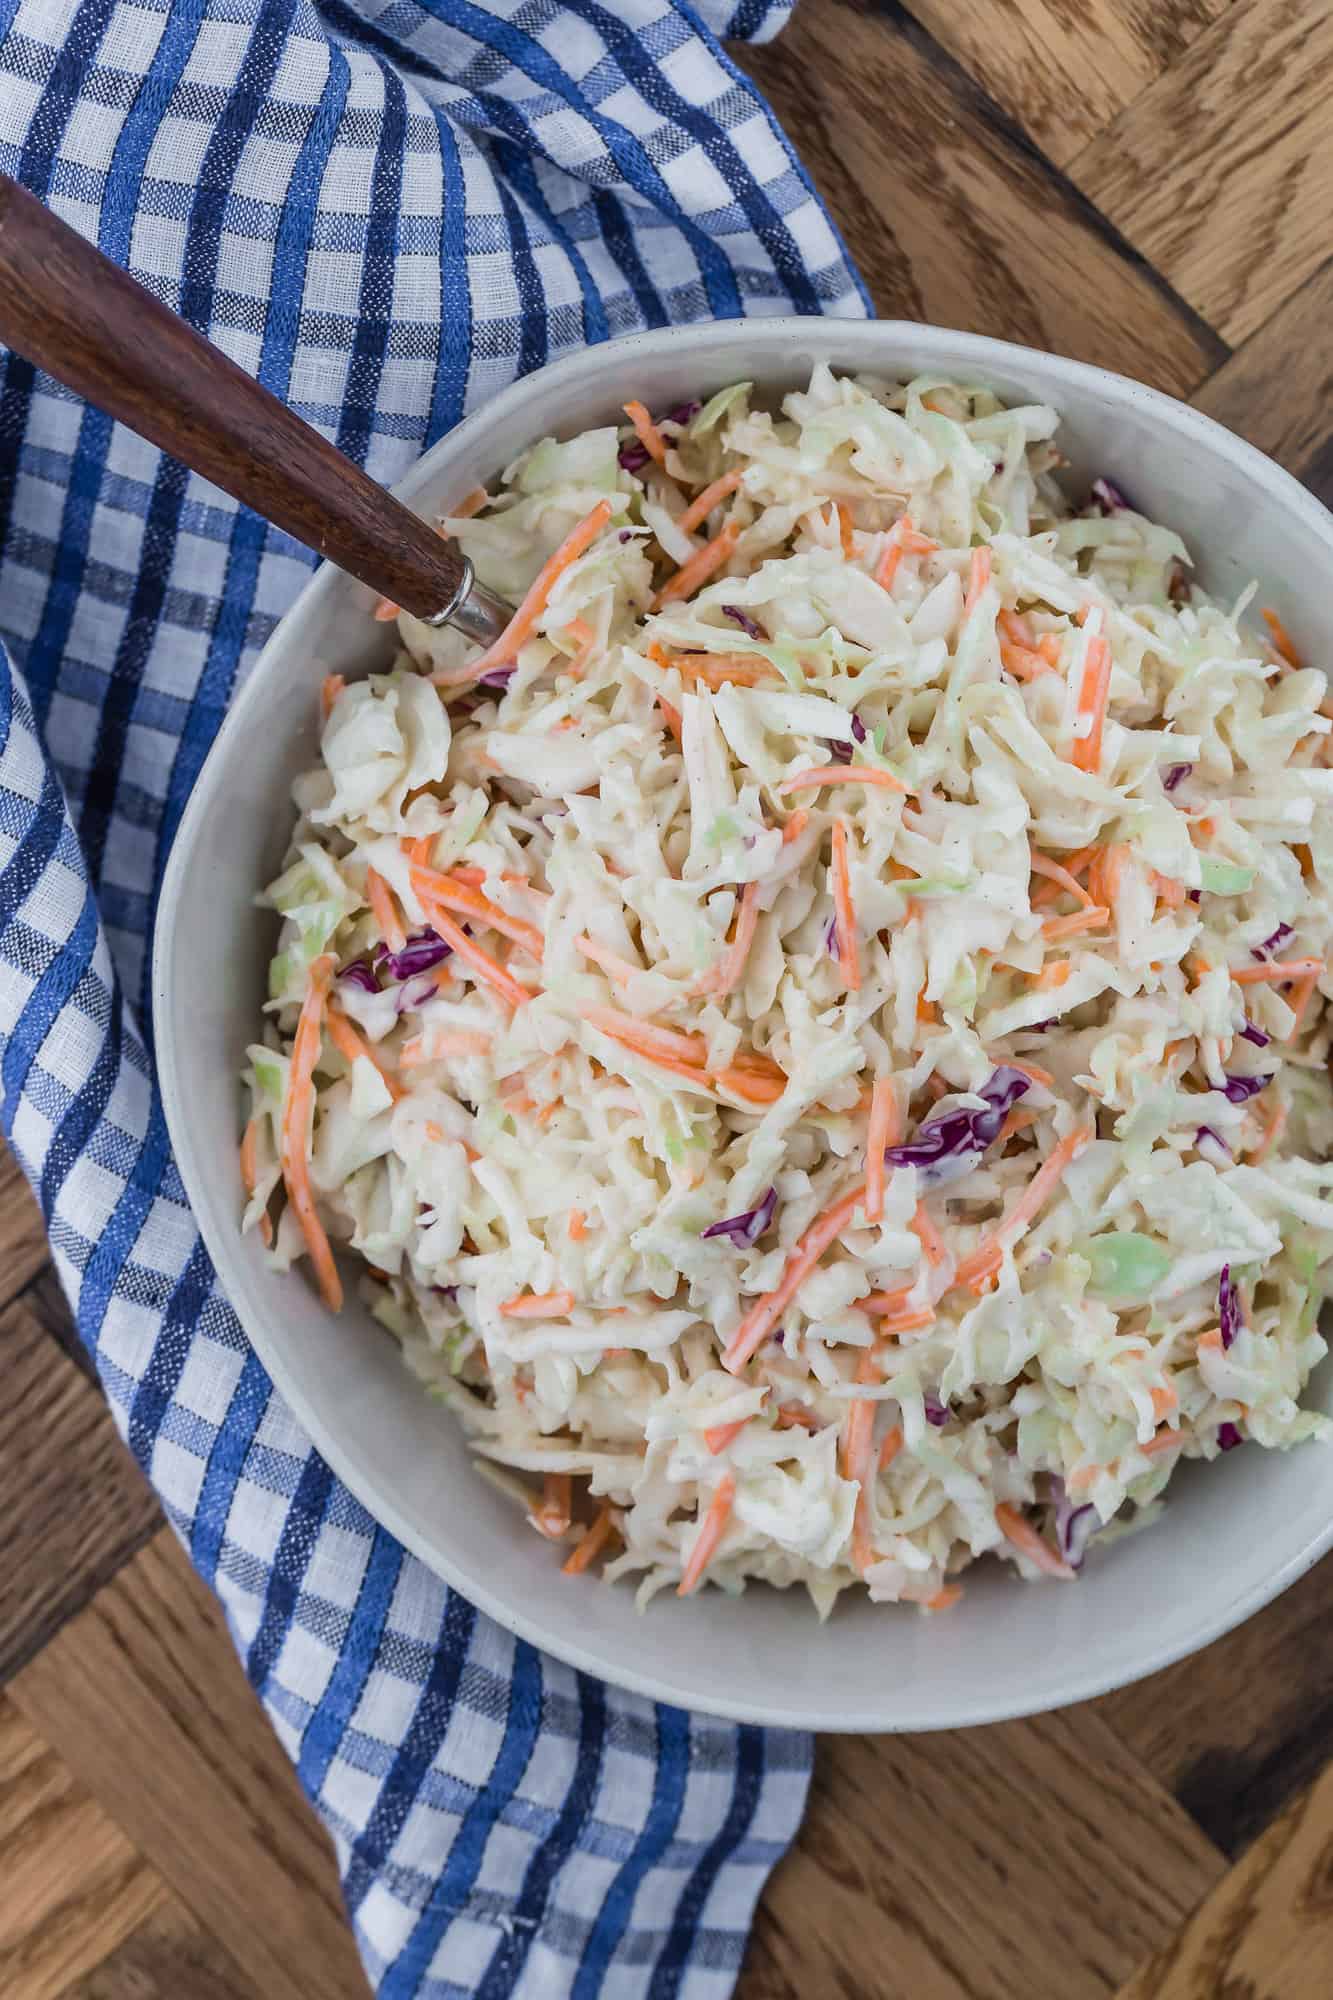 Coleslaw in a bowl with a blue and white linen.